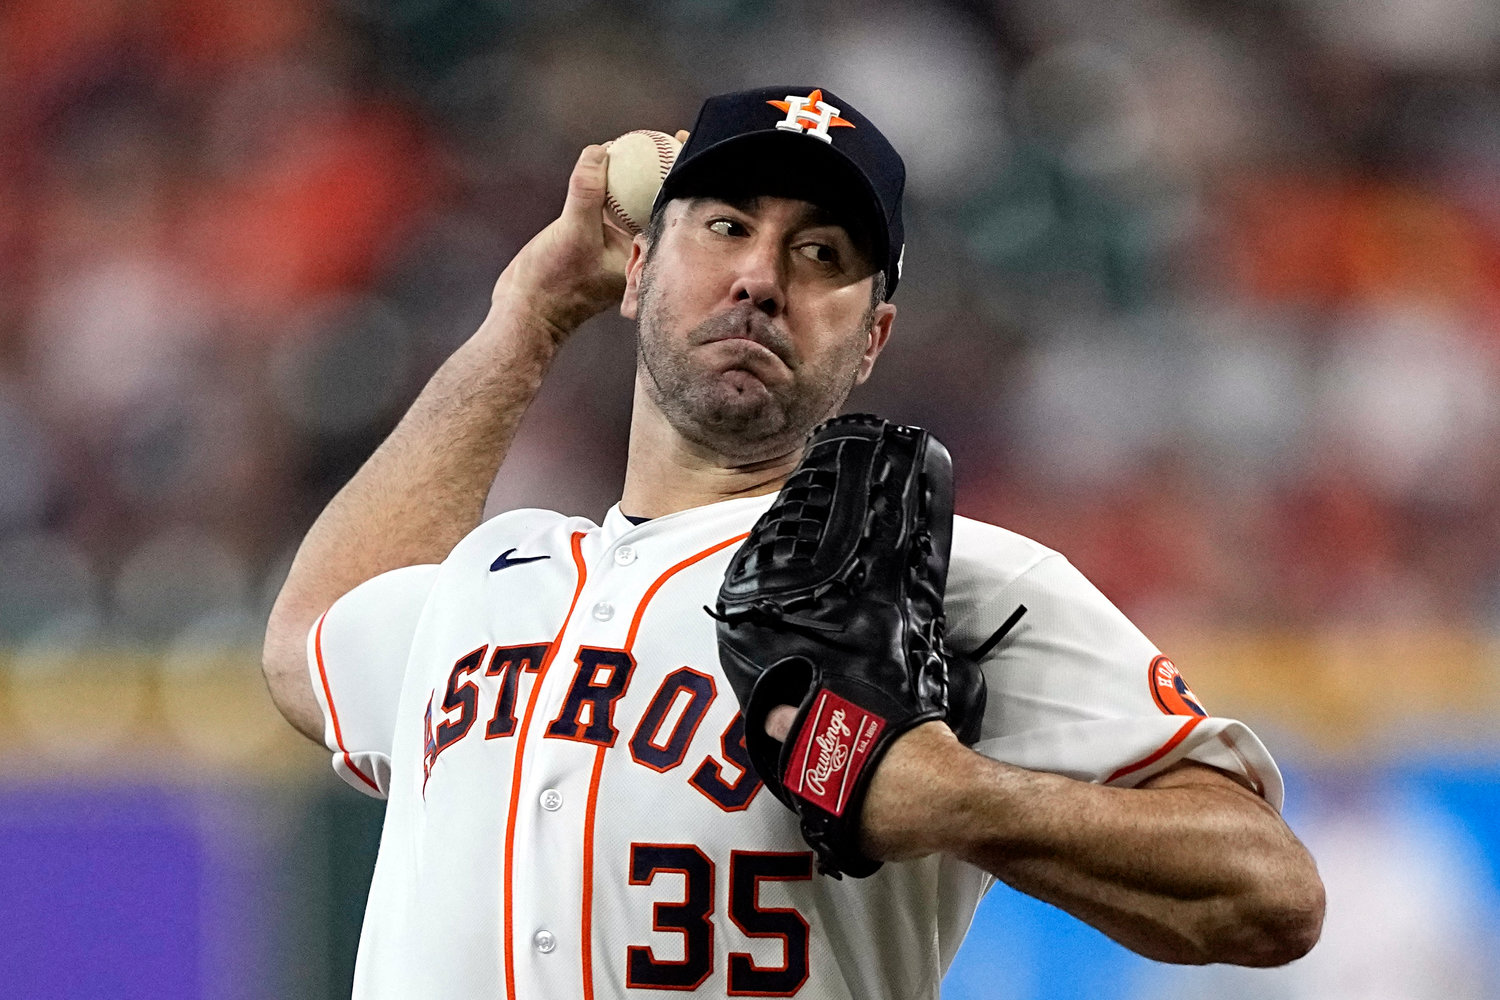 Houston Astros starting pitcher Justin Verlander throws against the Minnesota Twins earlier this year. Verlander won the American League Cy Young Award and has now picked up the AL Comeback Player of the Year award.